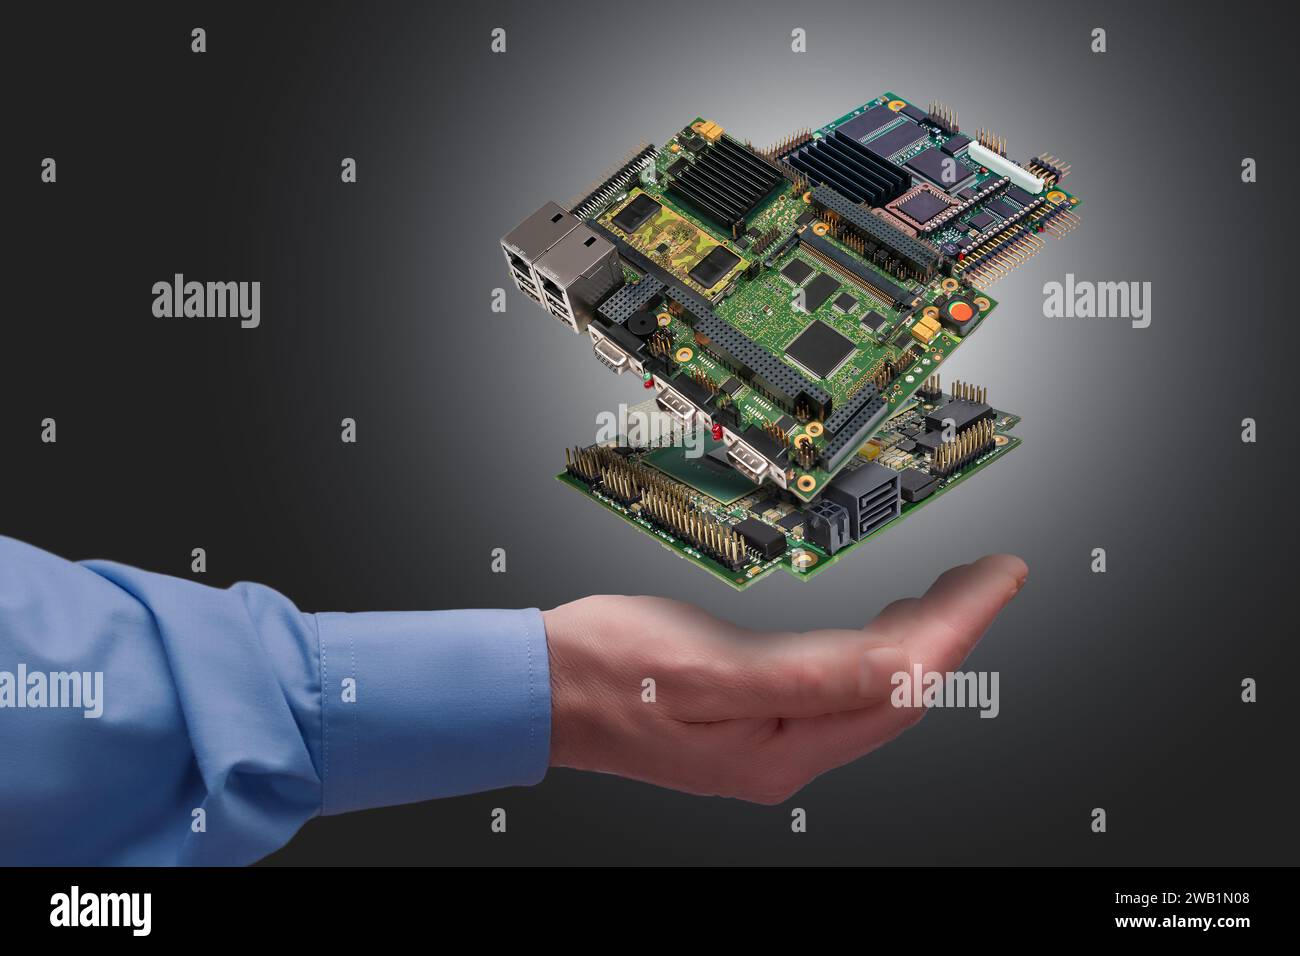 levitating industrial embedded CPU boards above man's hand on gray background Stock Photo